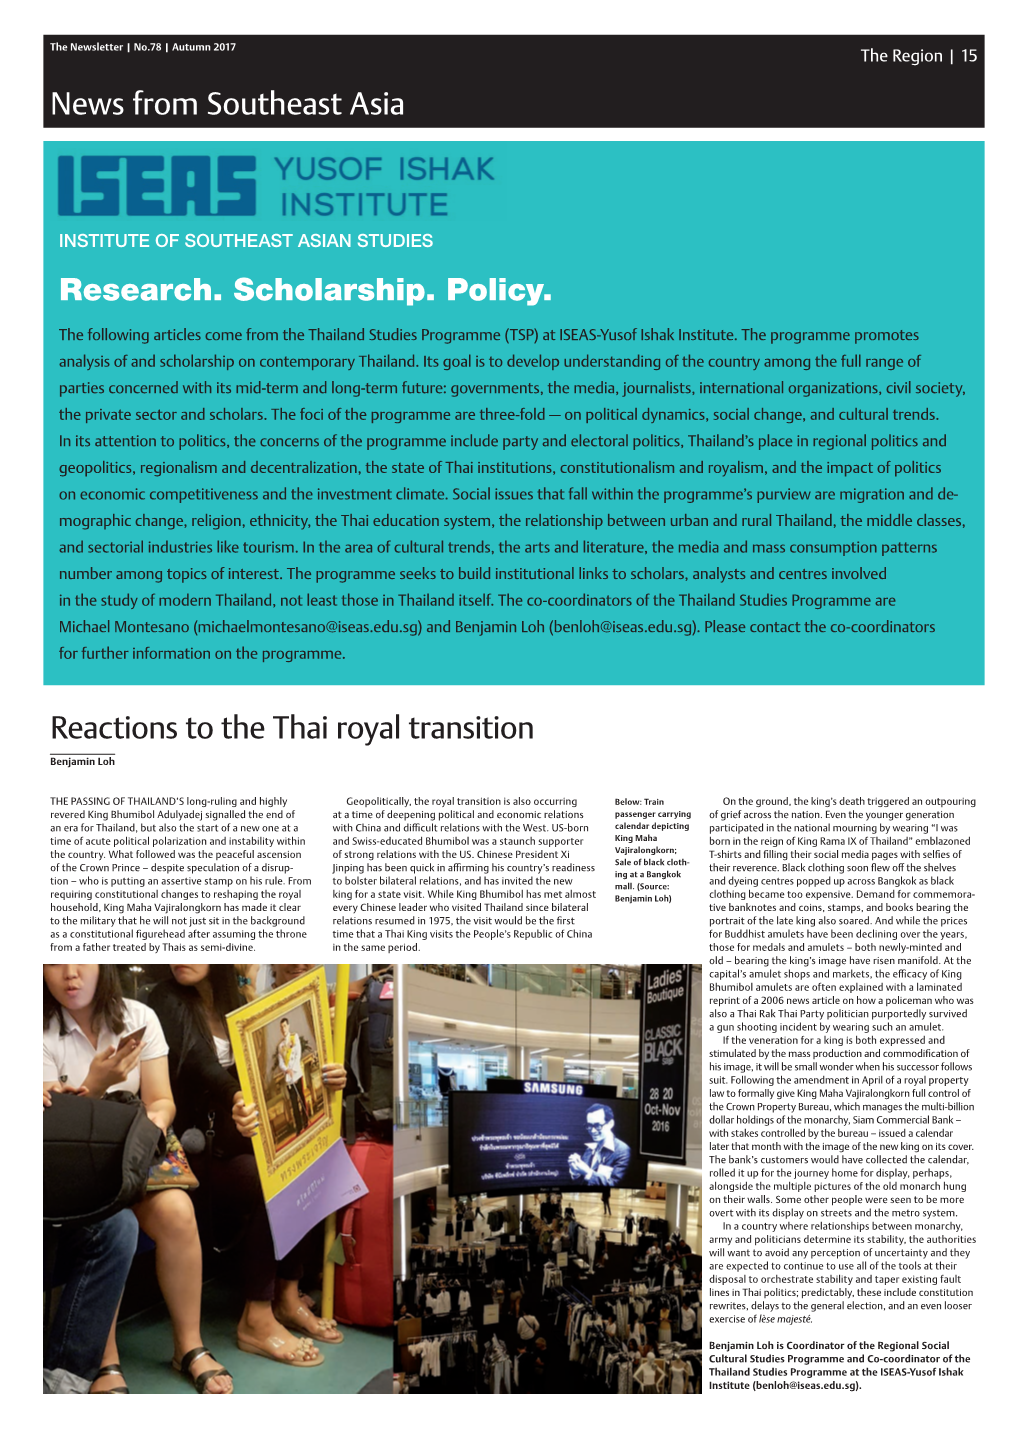 Research. Scholarship. Policy. Reactions to the Thai Royal